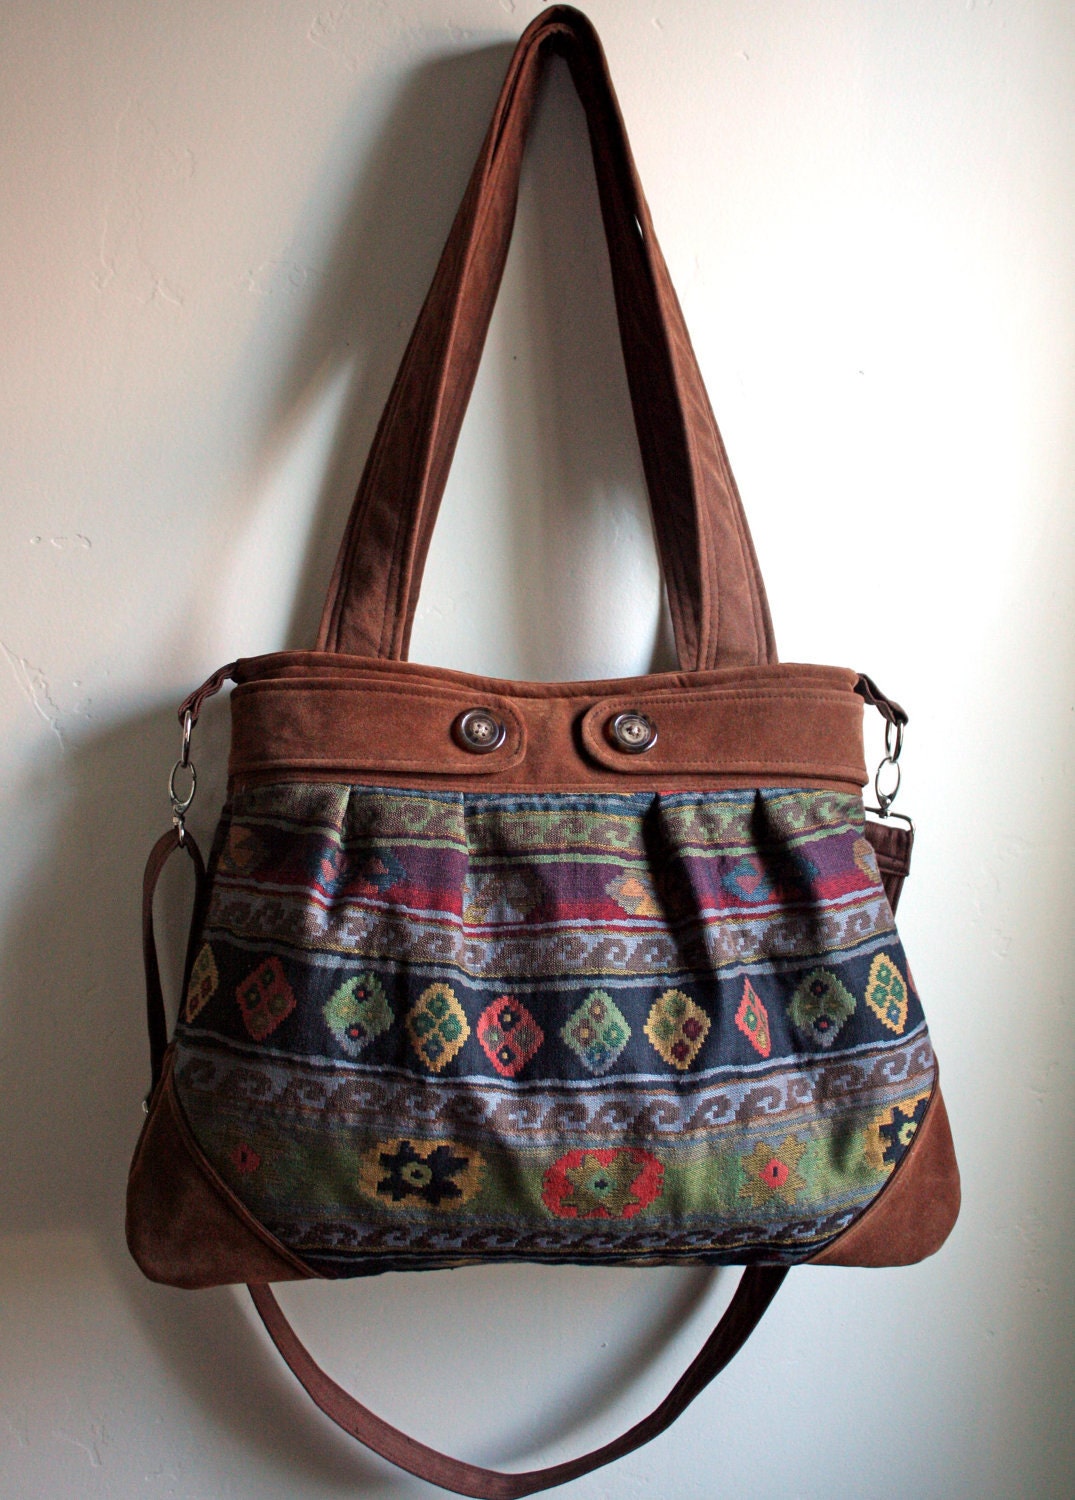 Hobo/Convertible purse in Navajo inspired cotton and Vegan